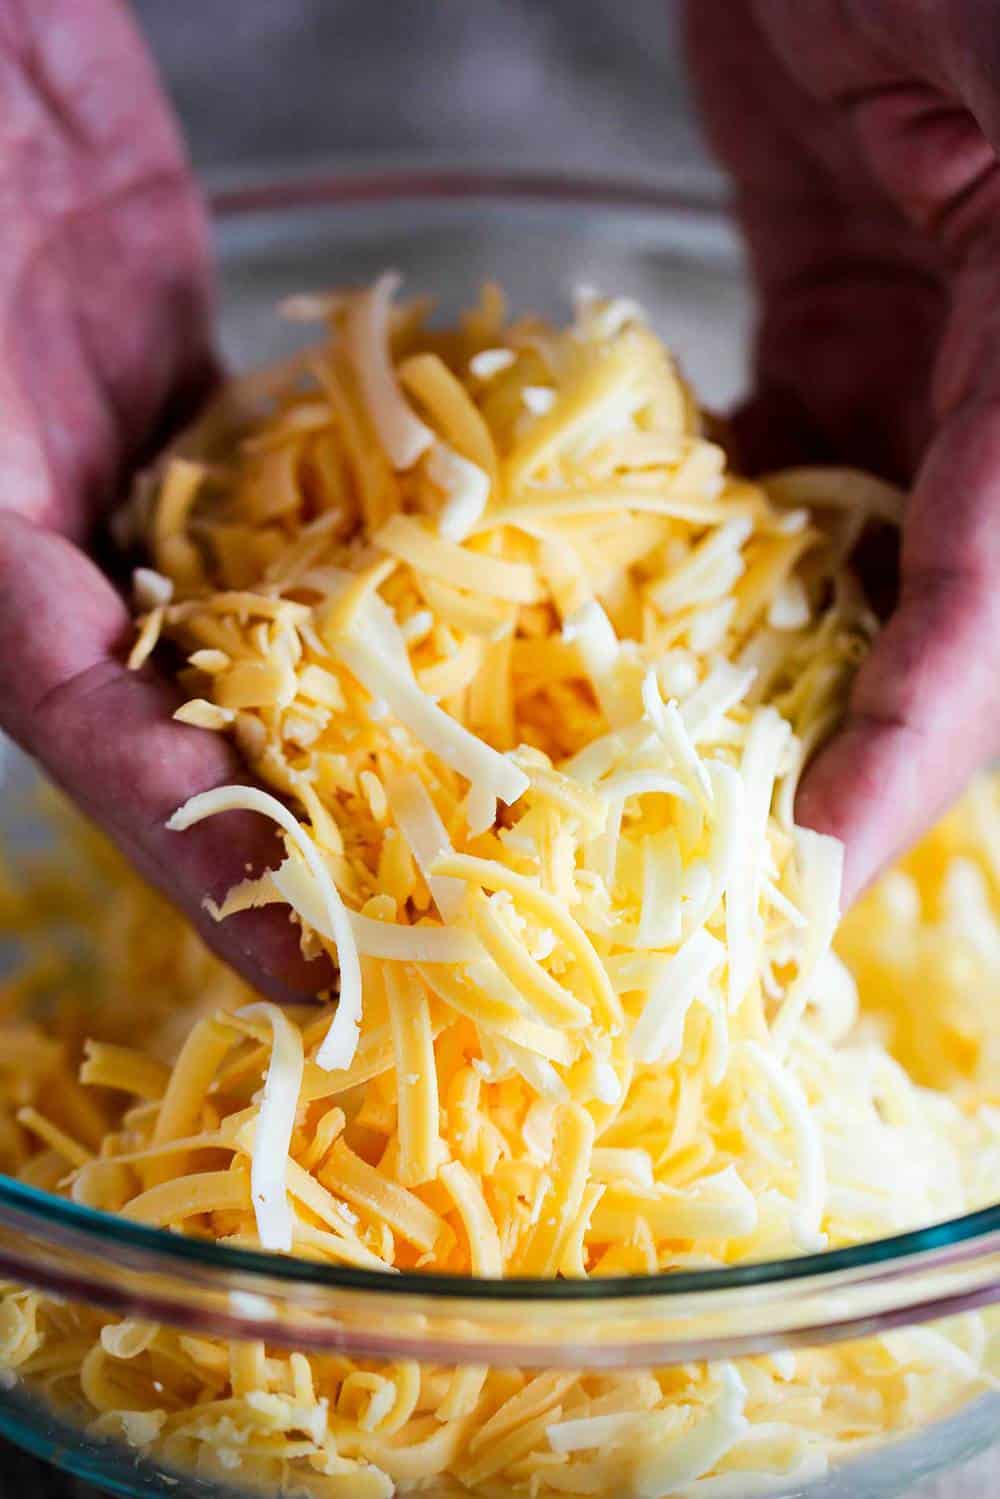 Shredded yellow and white American cheese being lifted out of a glass bowl. 